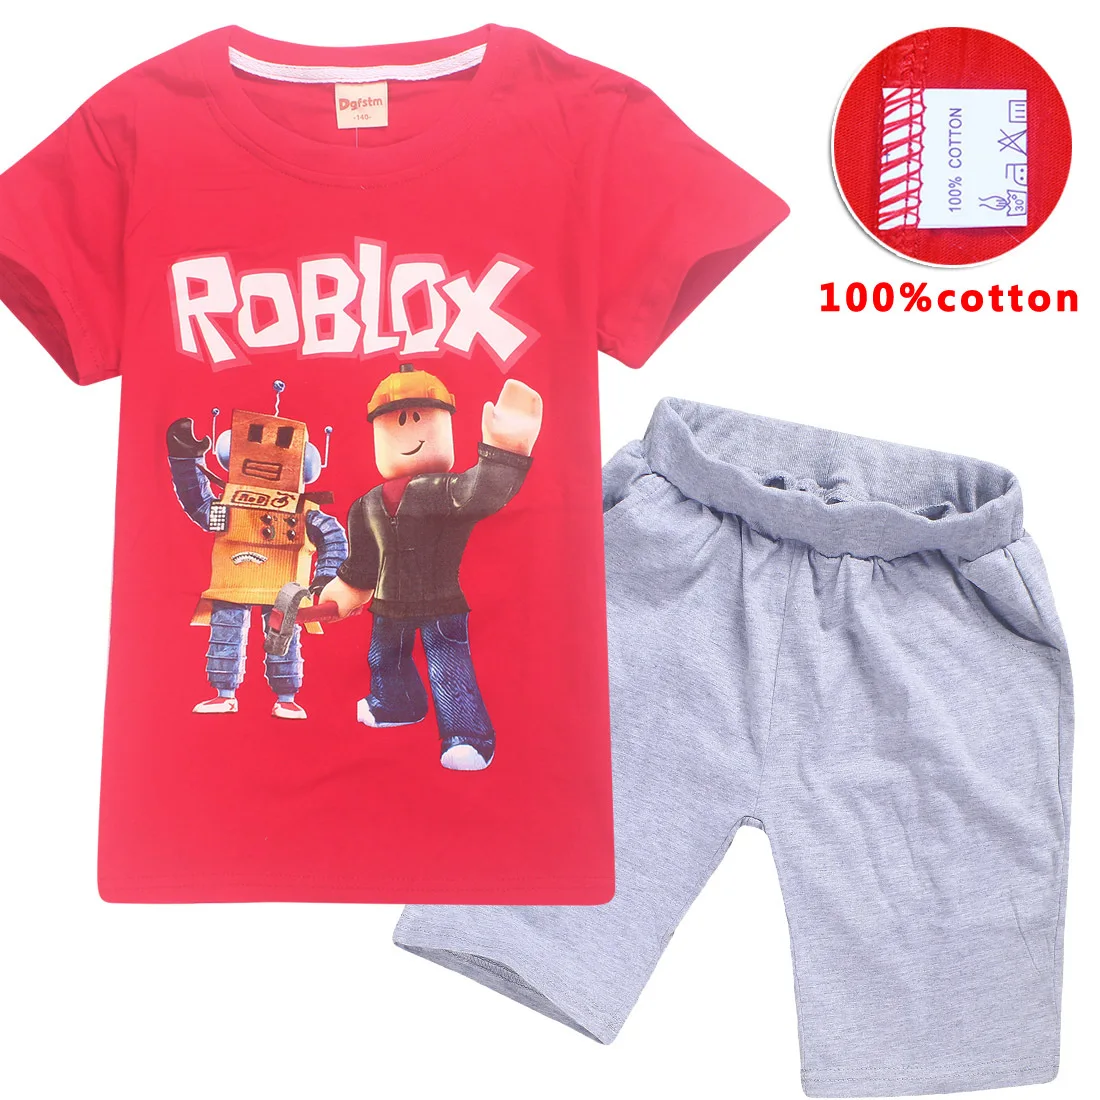 Z Y 6 14years Kids Fashion 2018 Summer Roblox Costume Teenager Boys Clothing Set T Shirt Tops Shorts Pants 2pcs Sets Kinder Nova Buy At The Price Of 13 75 In Aliexpress Com Imall Com - roblox boy outfits 2018 teens